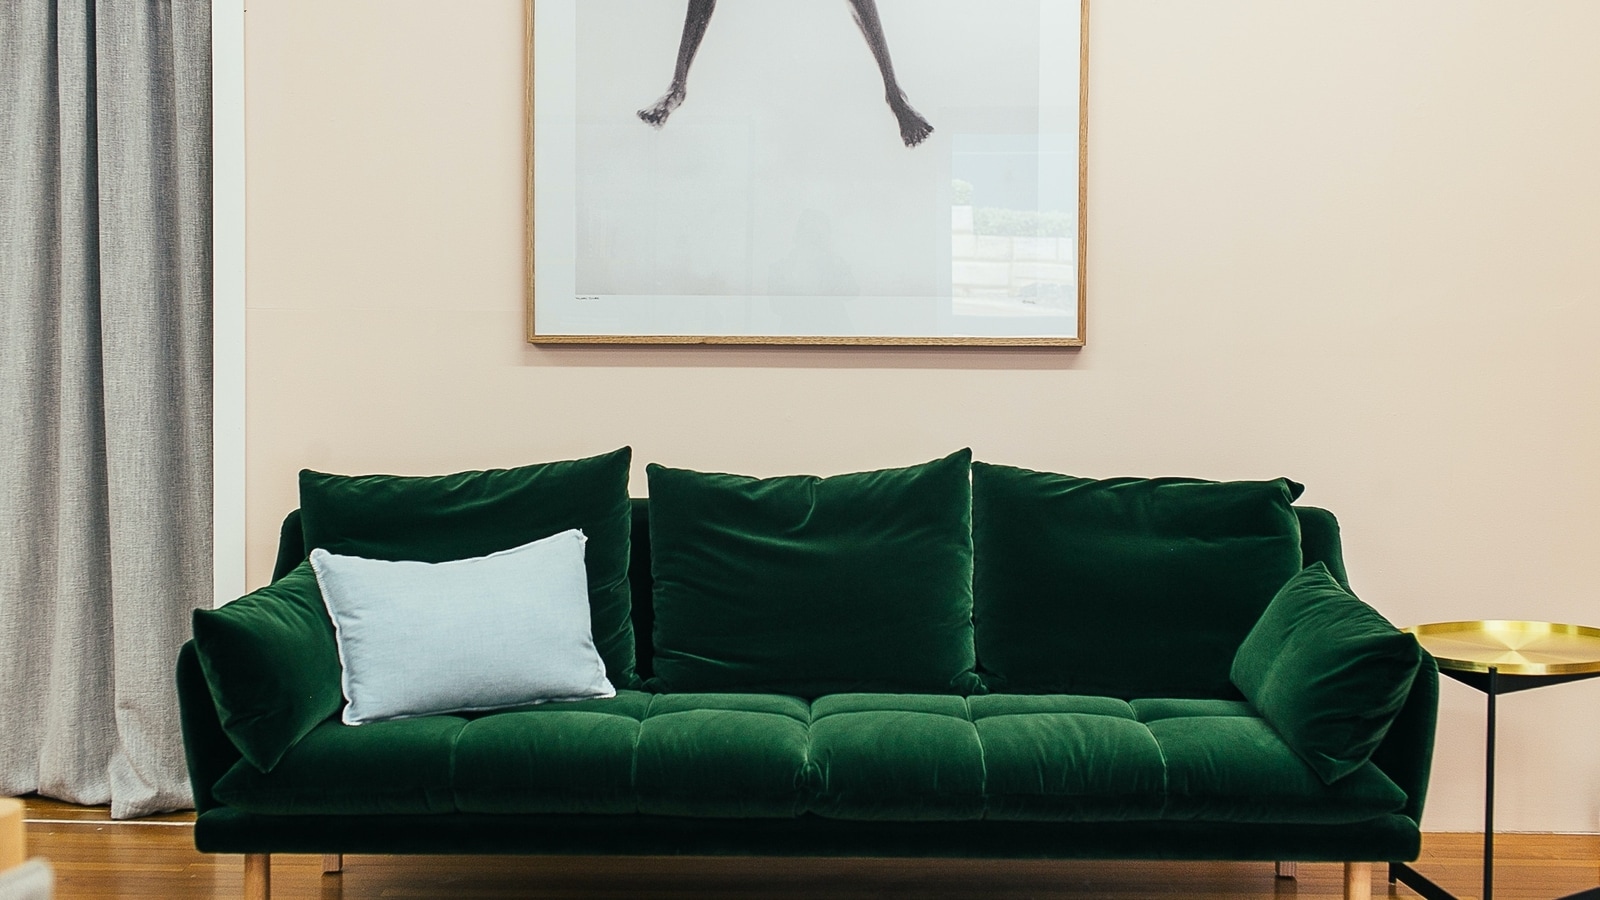 Home interior decor tips: Here’s the cheat code to selecting the perfect sofa